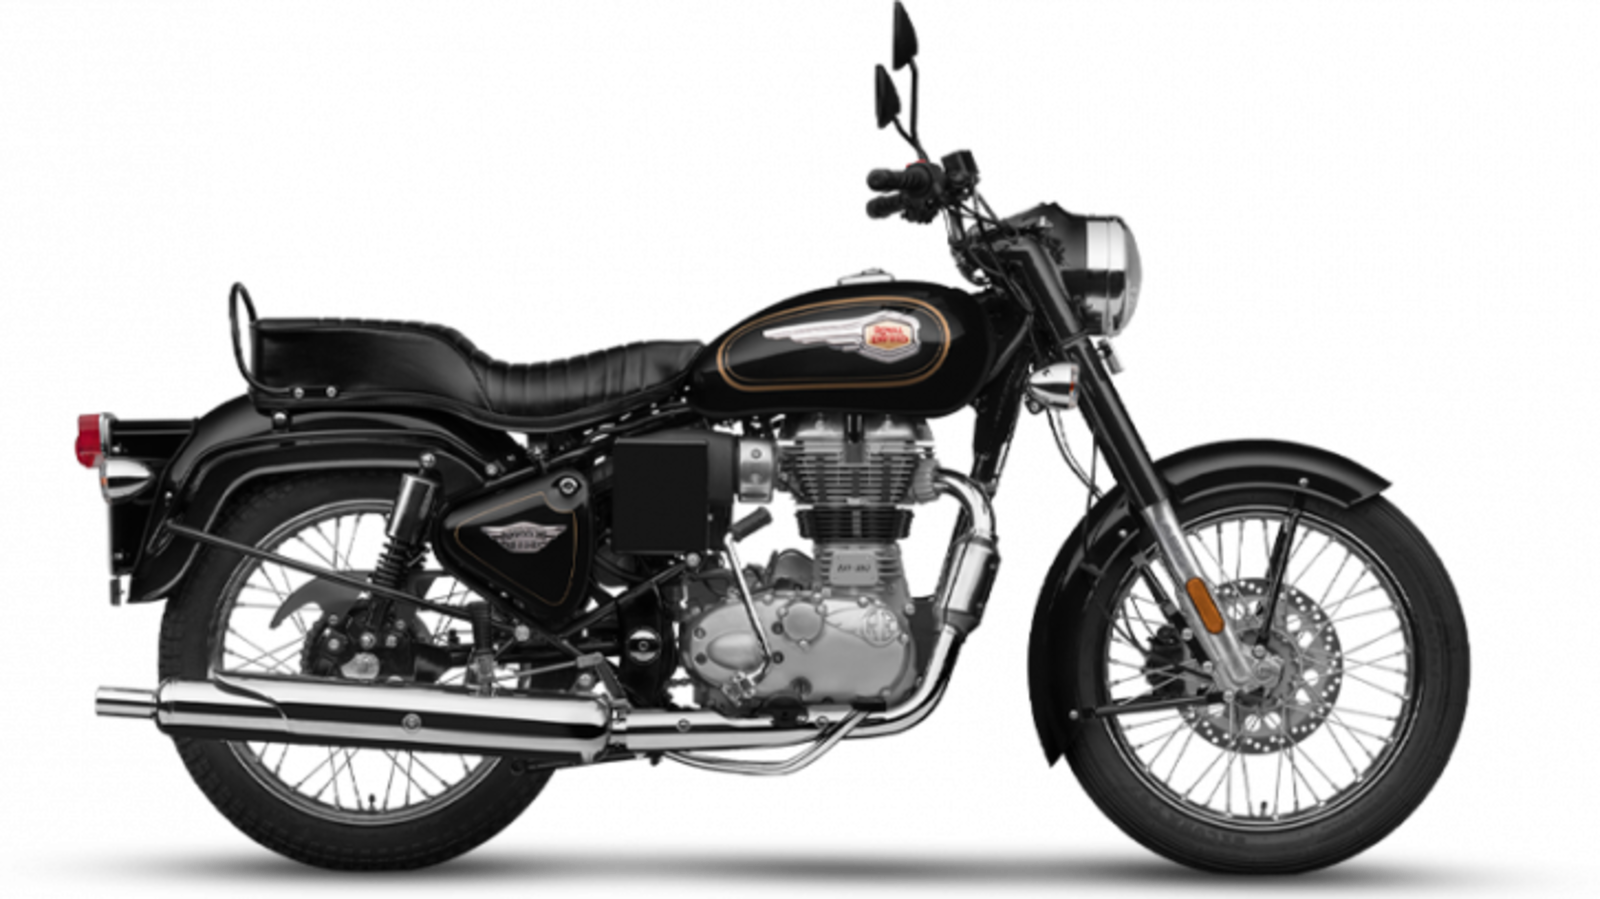 Royal Enfield Classic Bullet 350 Modified Model Gets A Subtle Upgrade ...